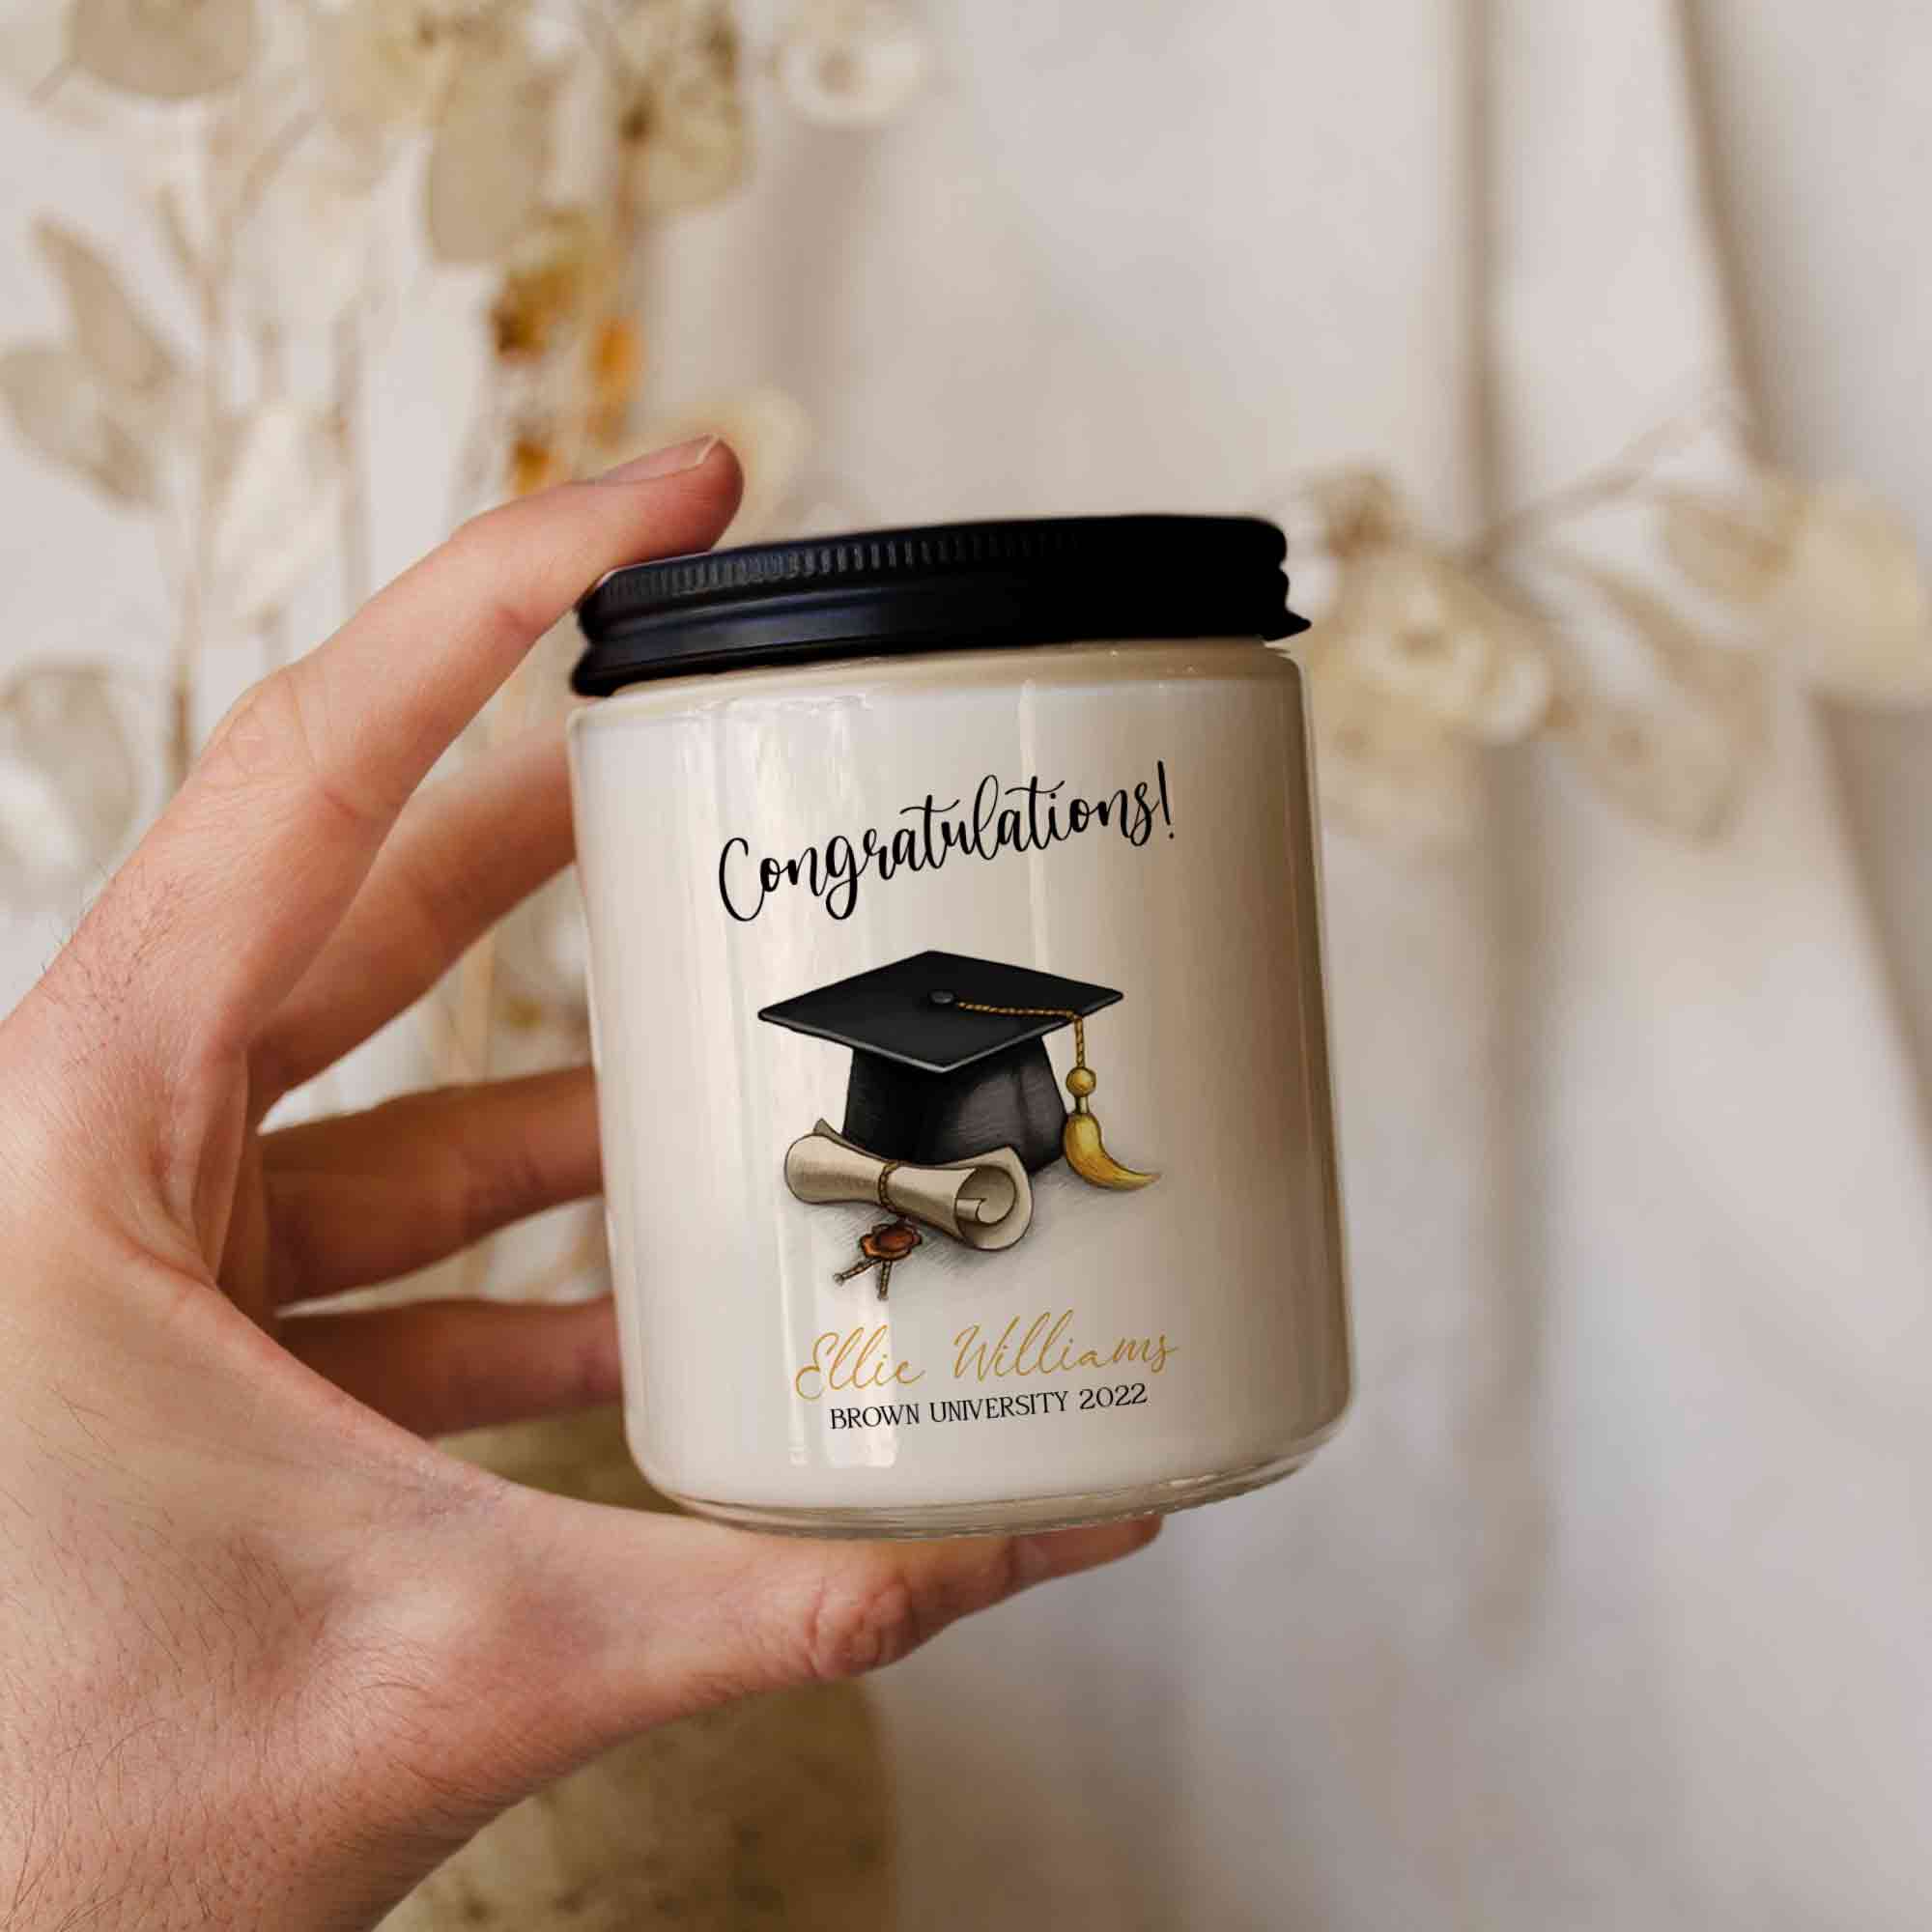 Congratulations Gift For College Graduation 2022, Unique Candle For Graduation, Custom Graduation Candle Gift